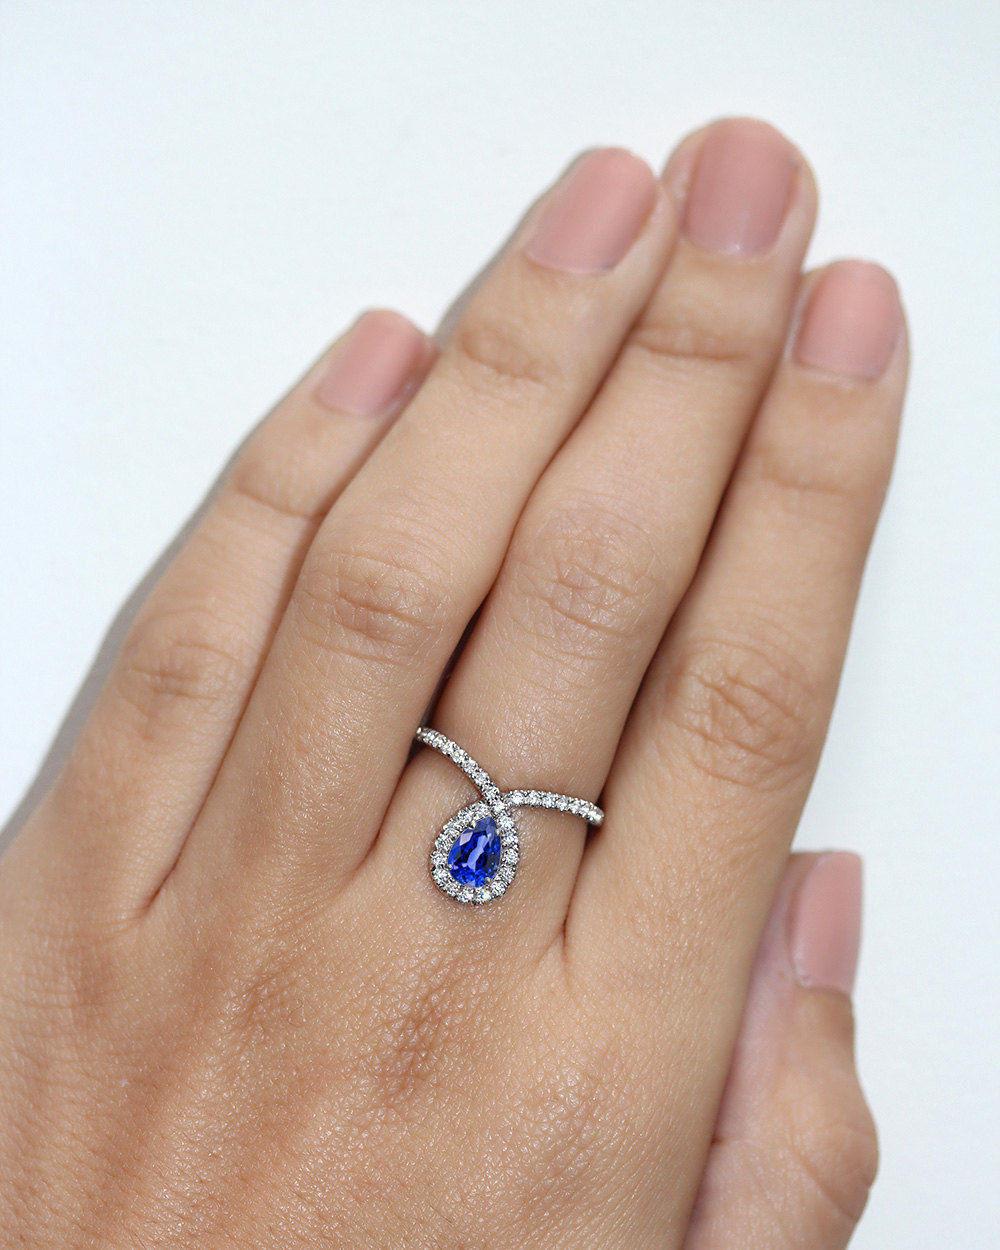 Beautiful pear blue sapphire & diamond halo engagement ring.
* The list is for the engagement ring only.
Handmade with care. 
An original design by Silly Shiny Diamonds. 

Details: 
* Center Stone Shape: Pear shape. 
* Center Stone Type: Natural